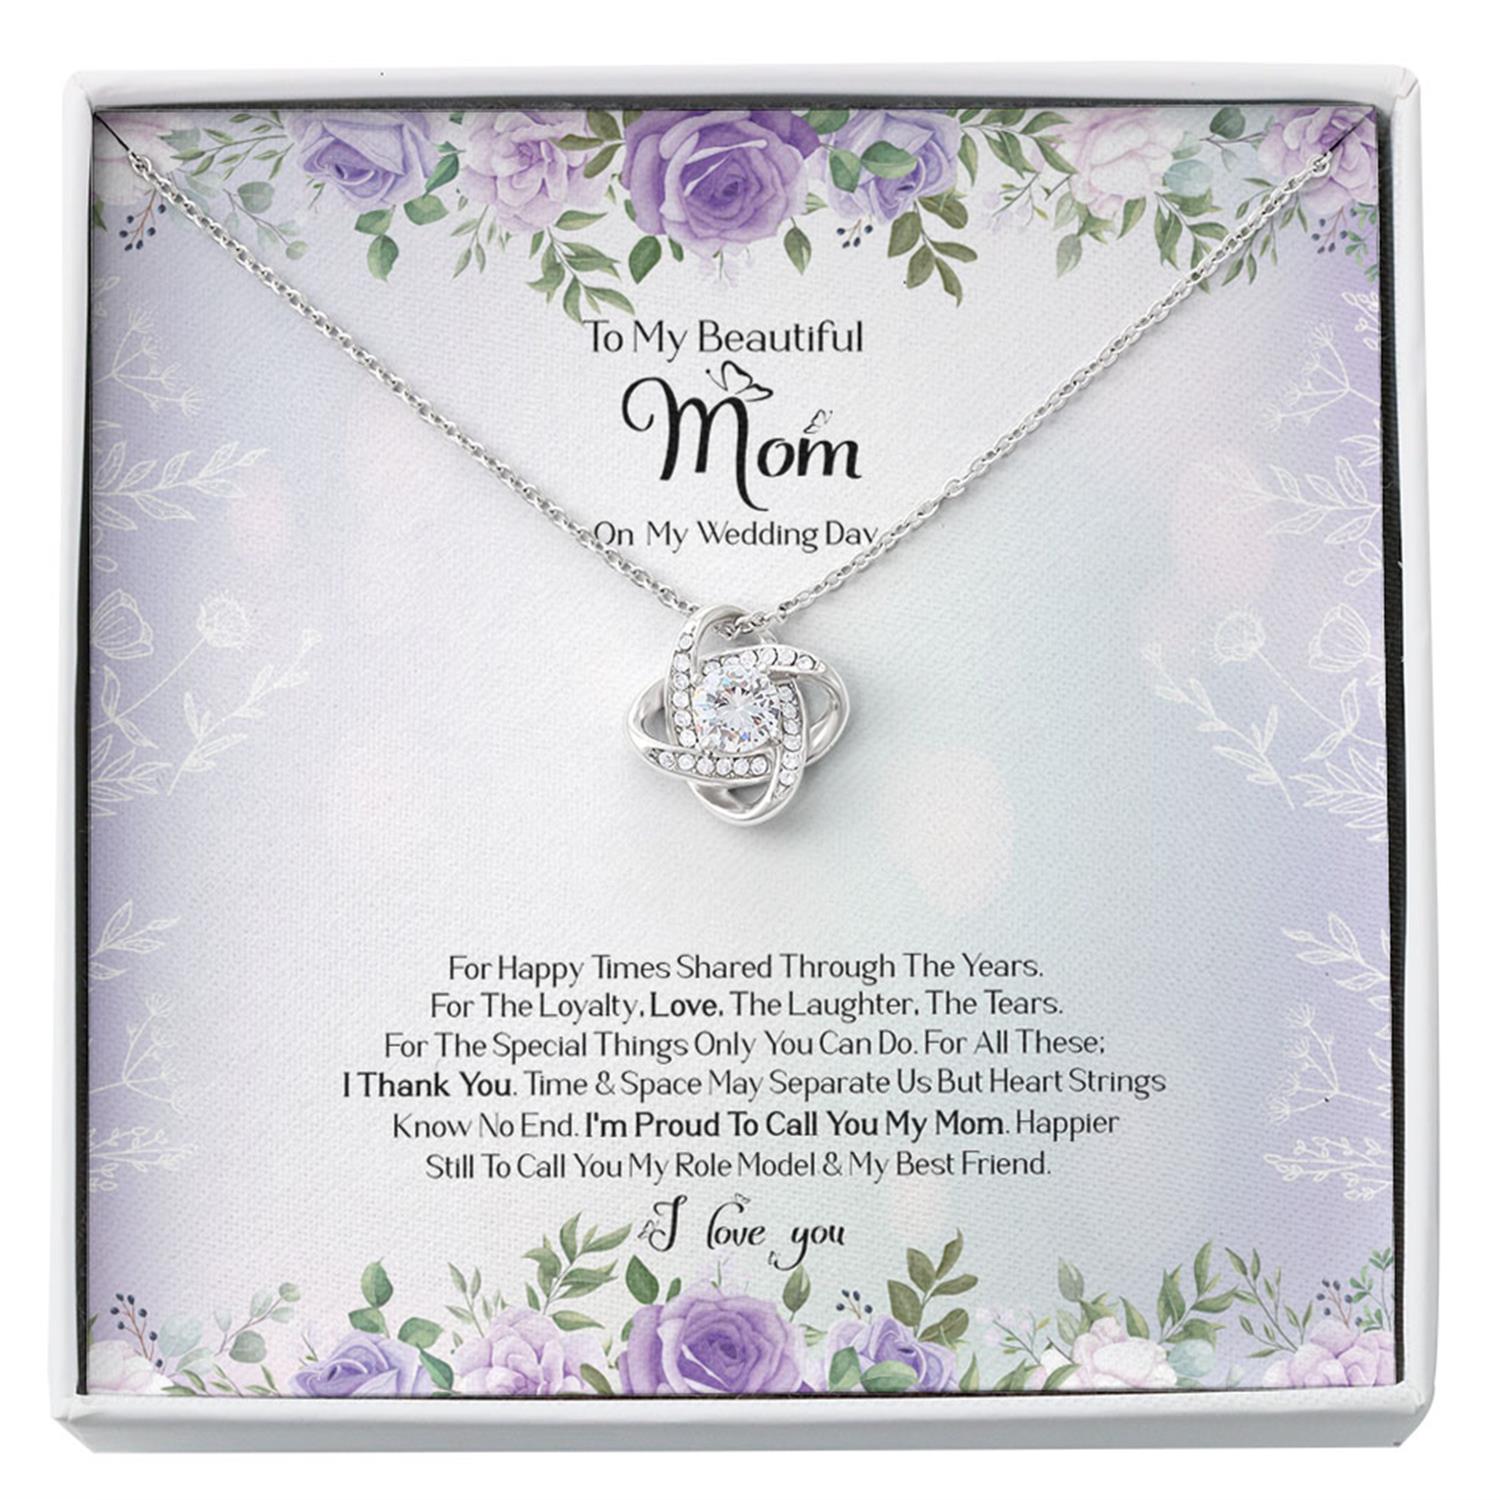 Mom Necklace, To Mom On My Wedding Day Necklace, Mother Of The Bride Gift From Daughter, Bride Custom Necklace